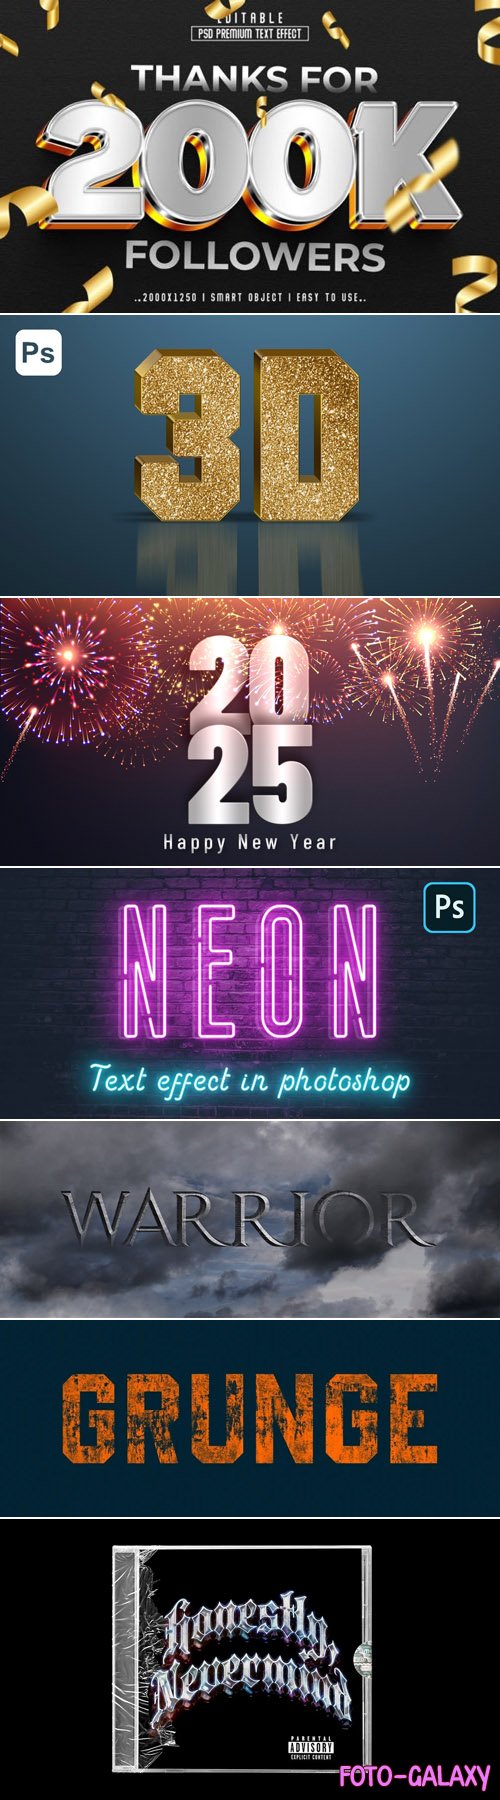 15+ New 3D Editable Text Effects for Photoshop